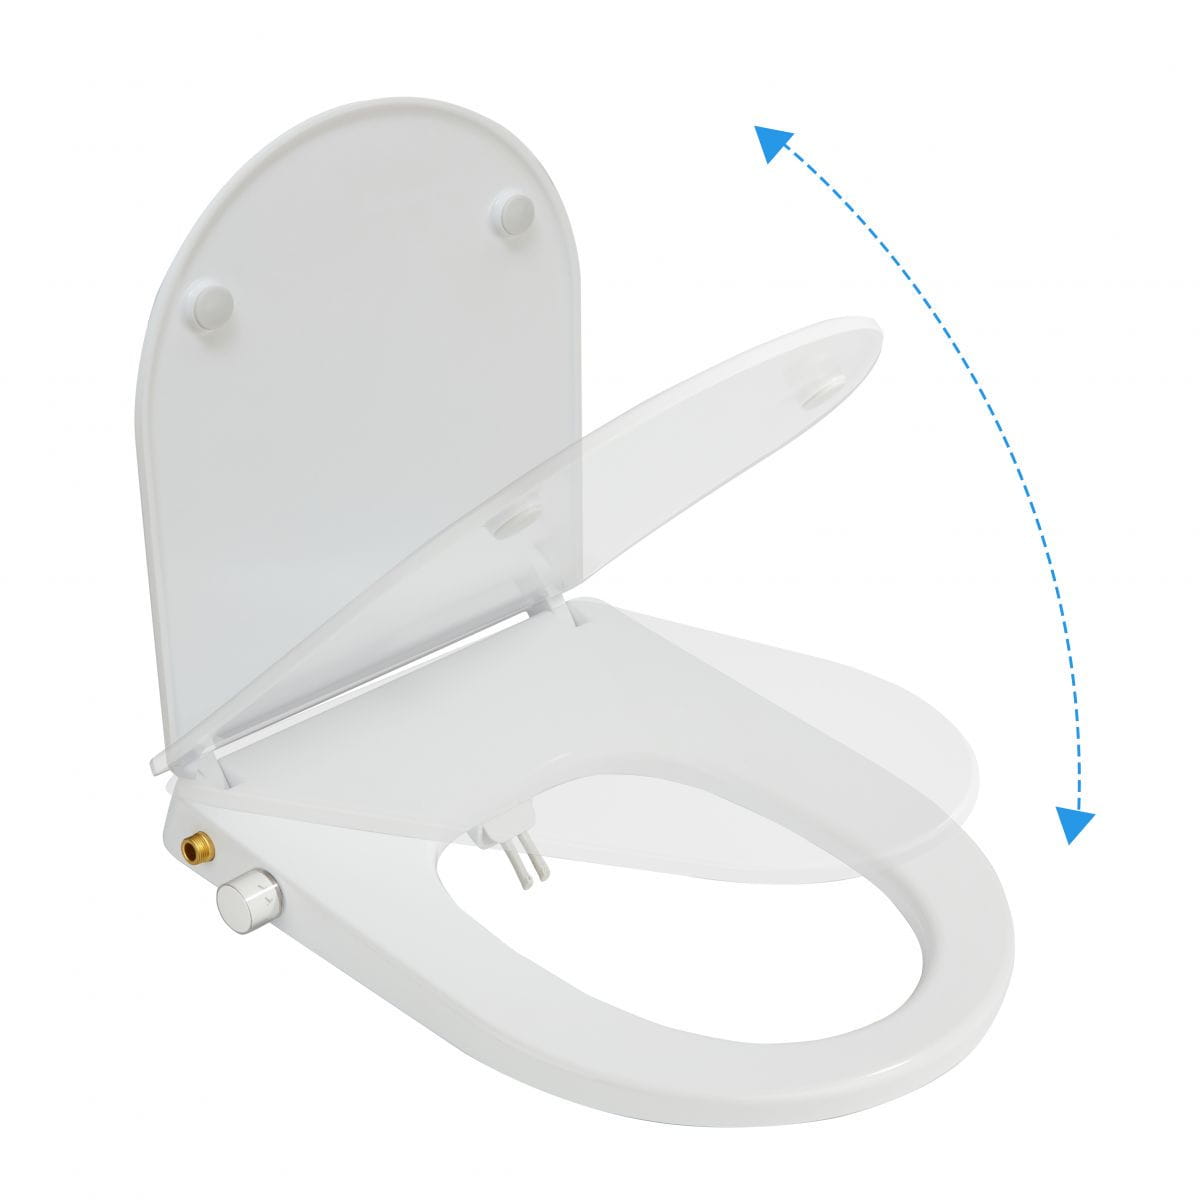 Electronic Bidet Toilet Seat with Heated Seat